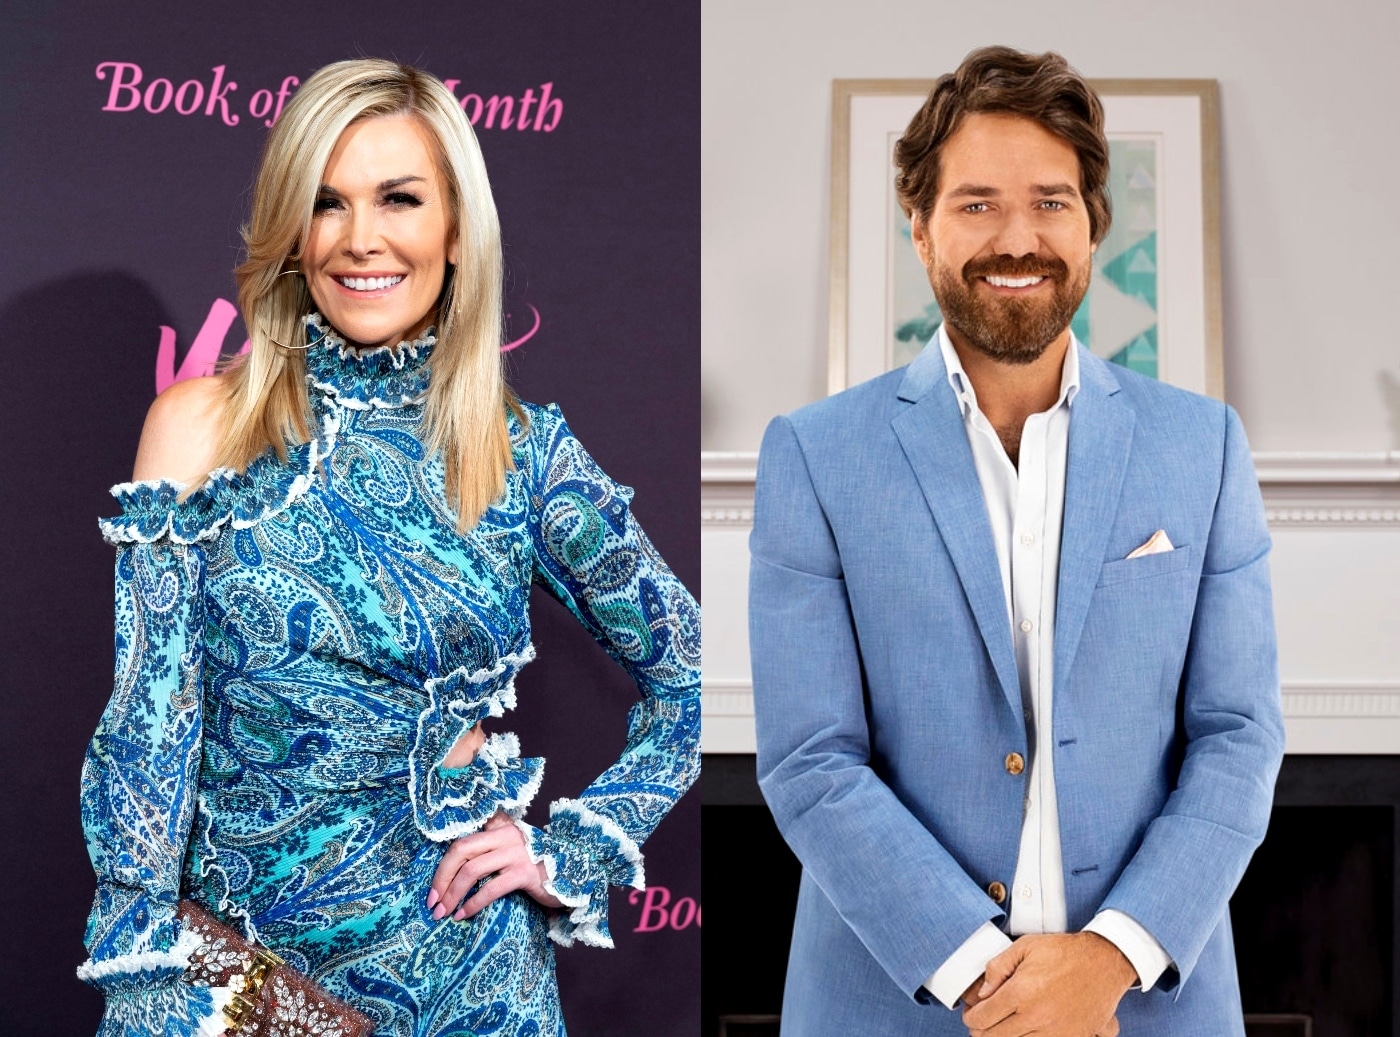 Tinsley Mortimer and John Pringle Get Flirty on Instagram! See RHONY Alum's Exchange With Southern Charm Star